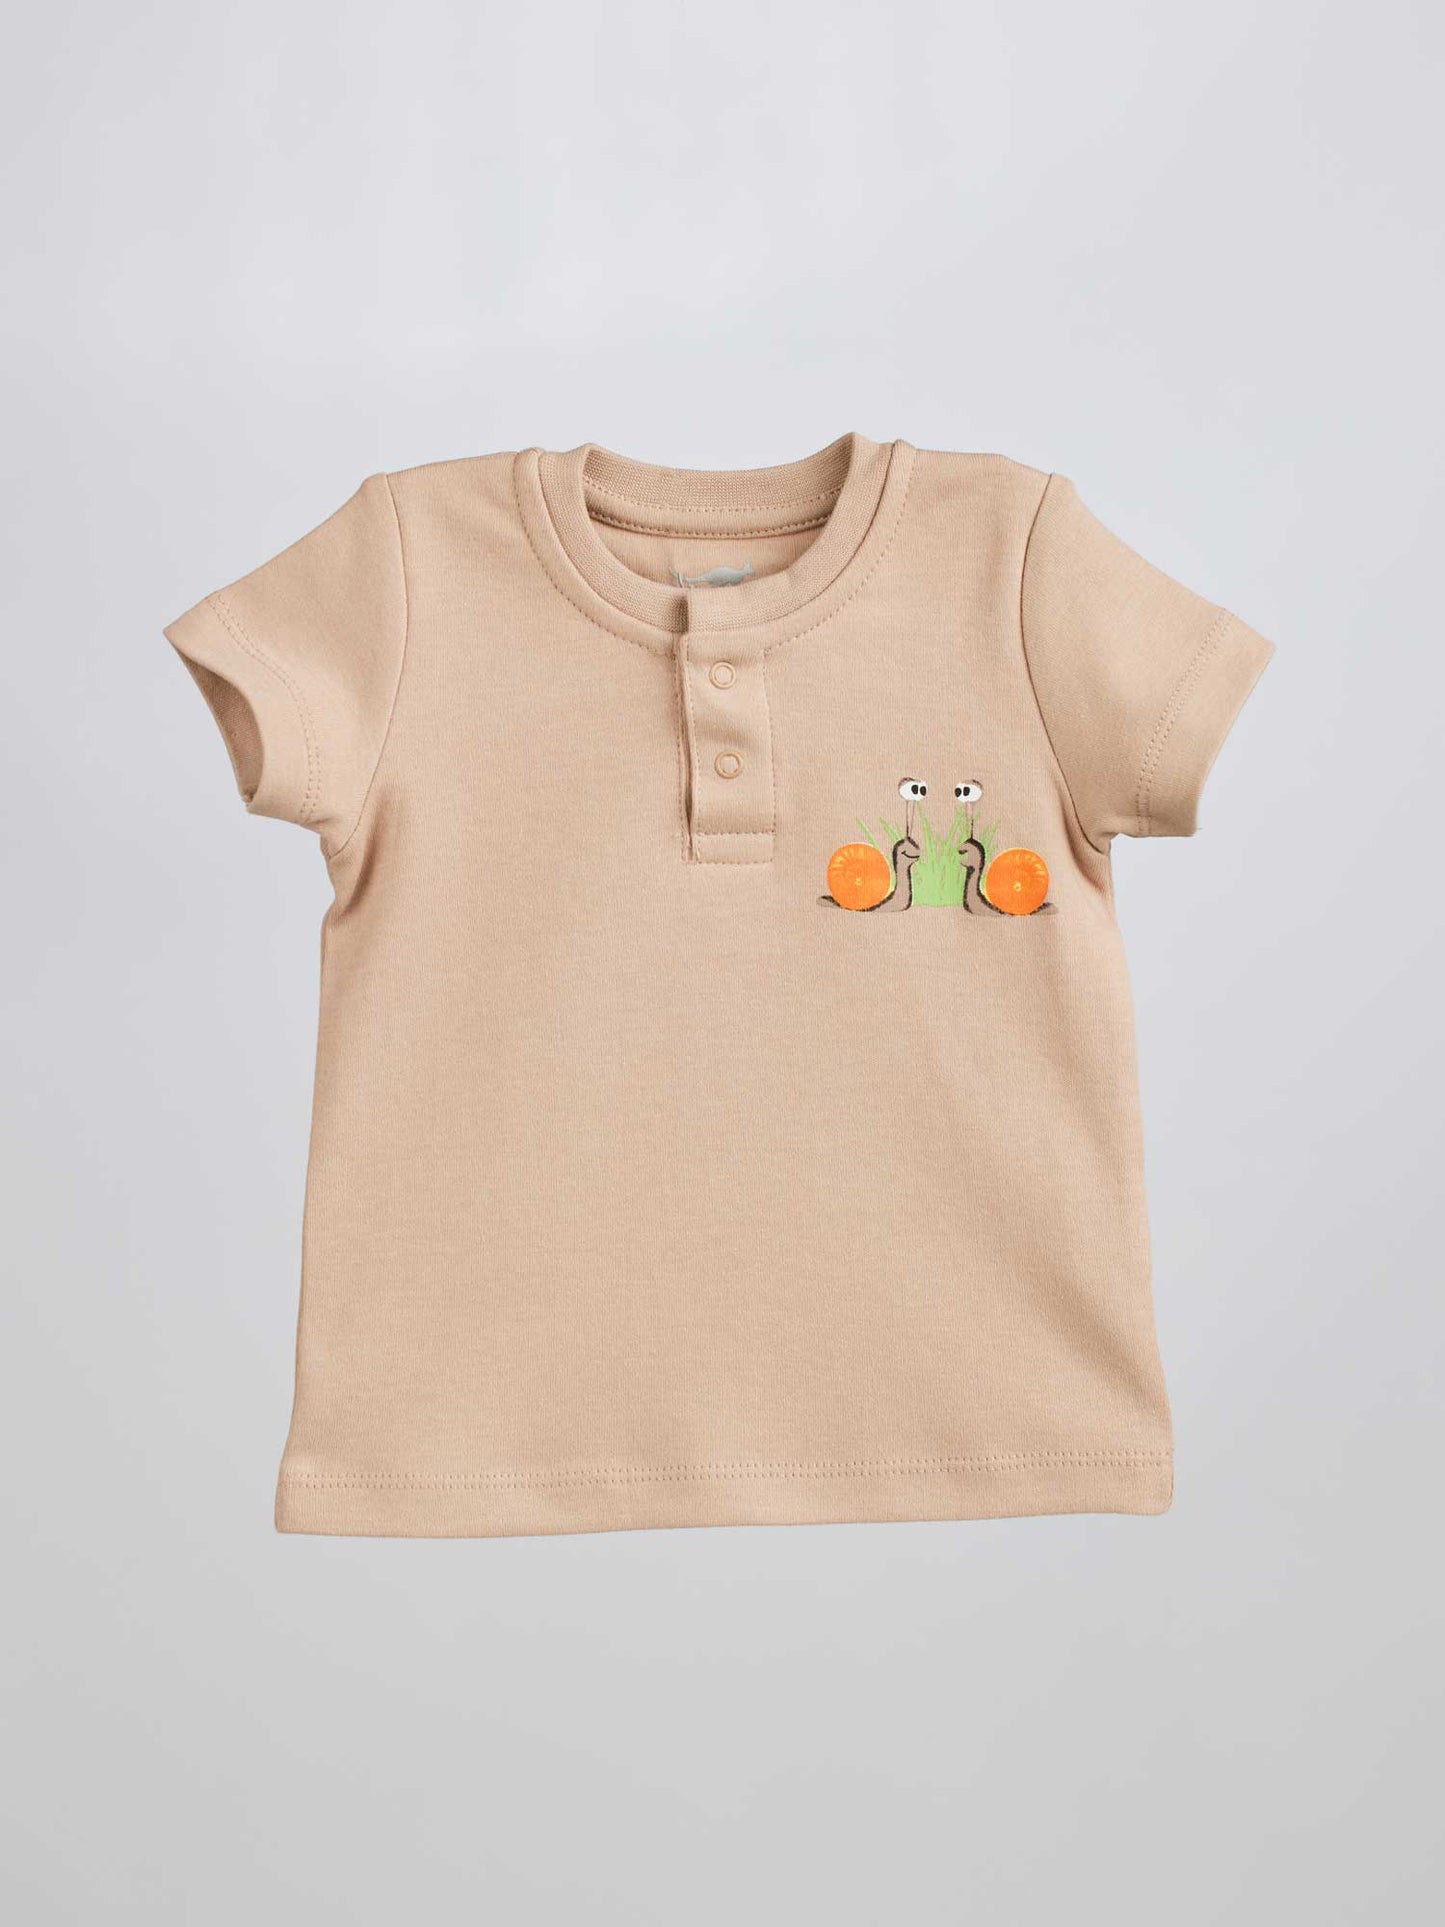 This modern Baby T-shirt Snails 299 is perfect for your child's everyday wardrobe. Ideal for both girls and boys, the lightweight fabric provides all-day comfort, while the minimalistic design with a playful snail print makes it a timeless classic. 